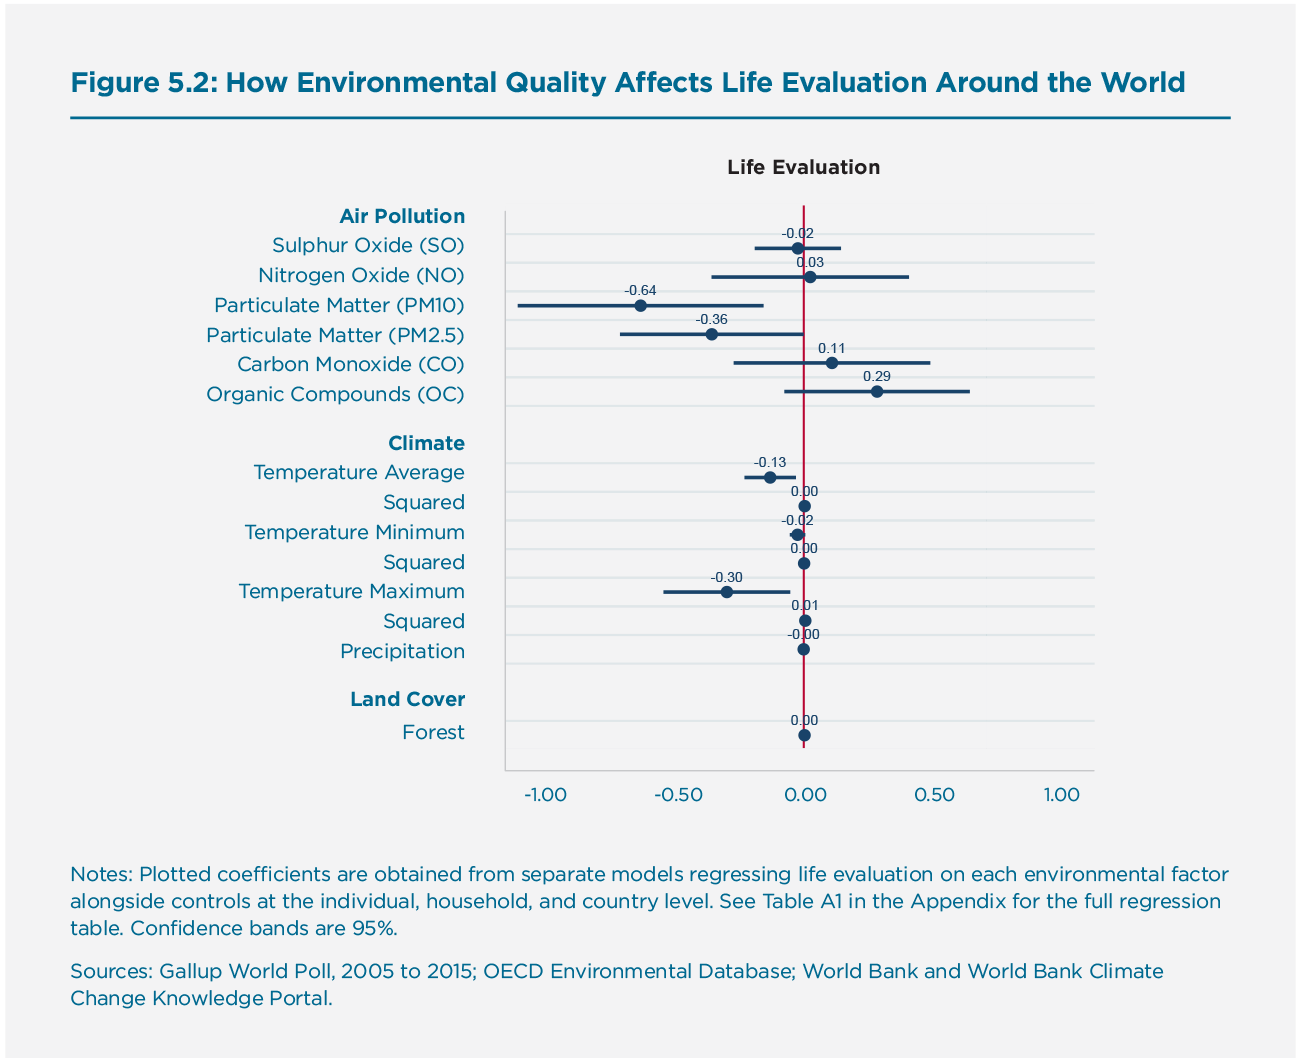 Figure 5.2: How Our Environment Affects Life Evaluation Around the World